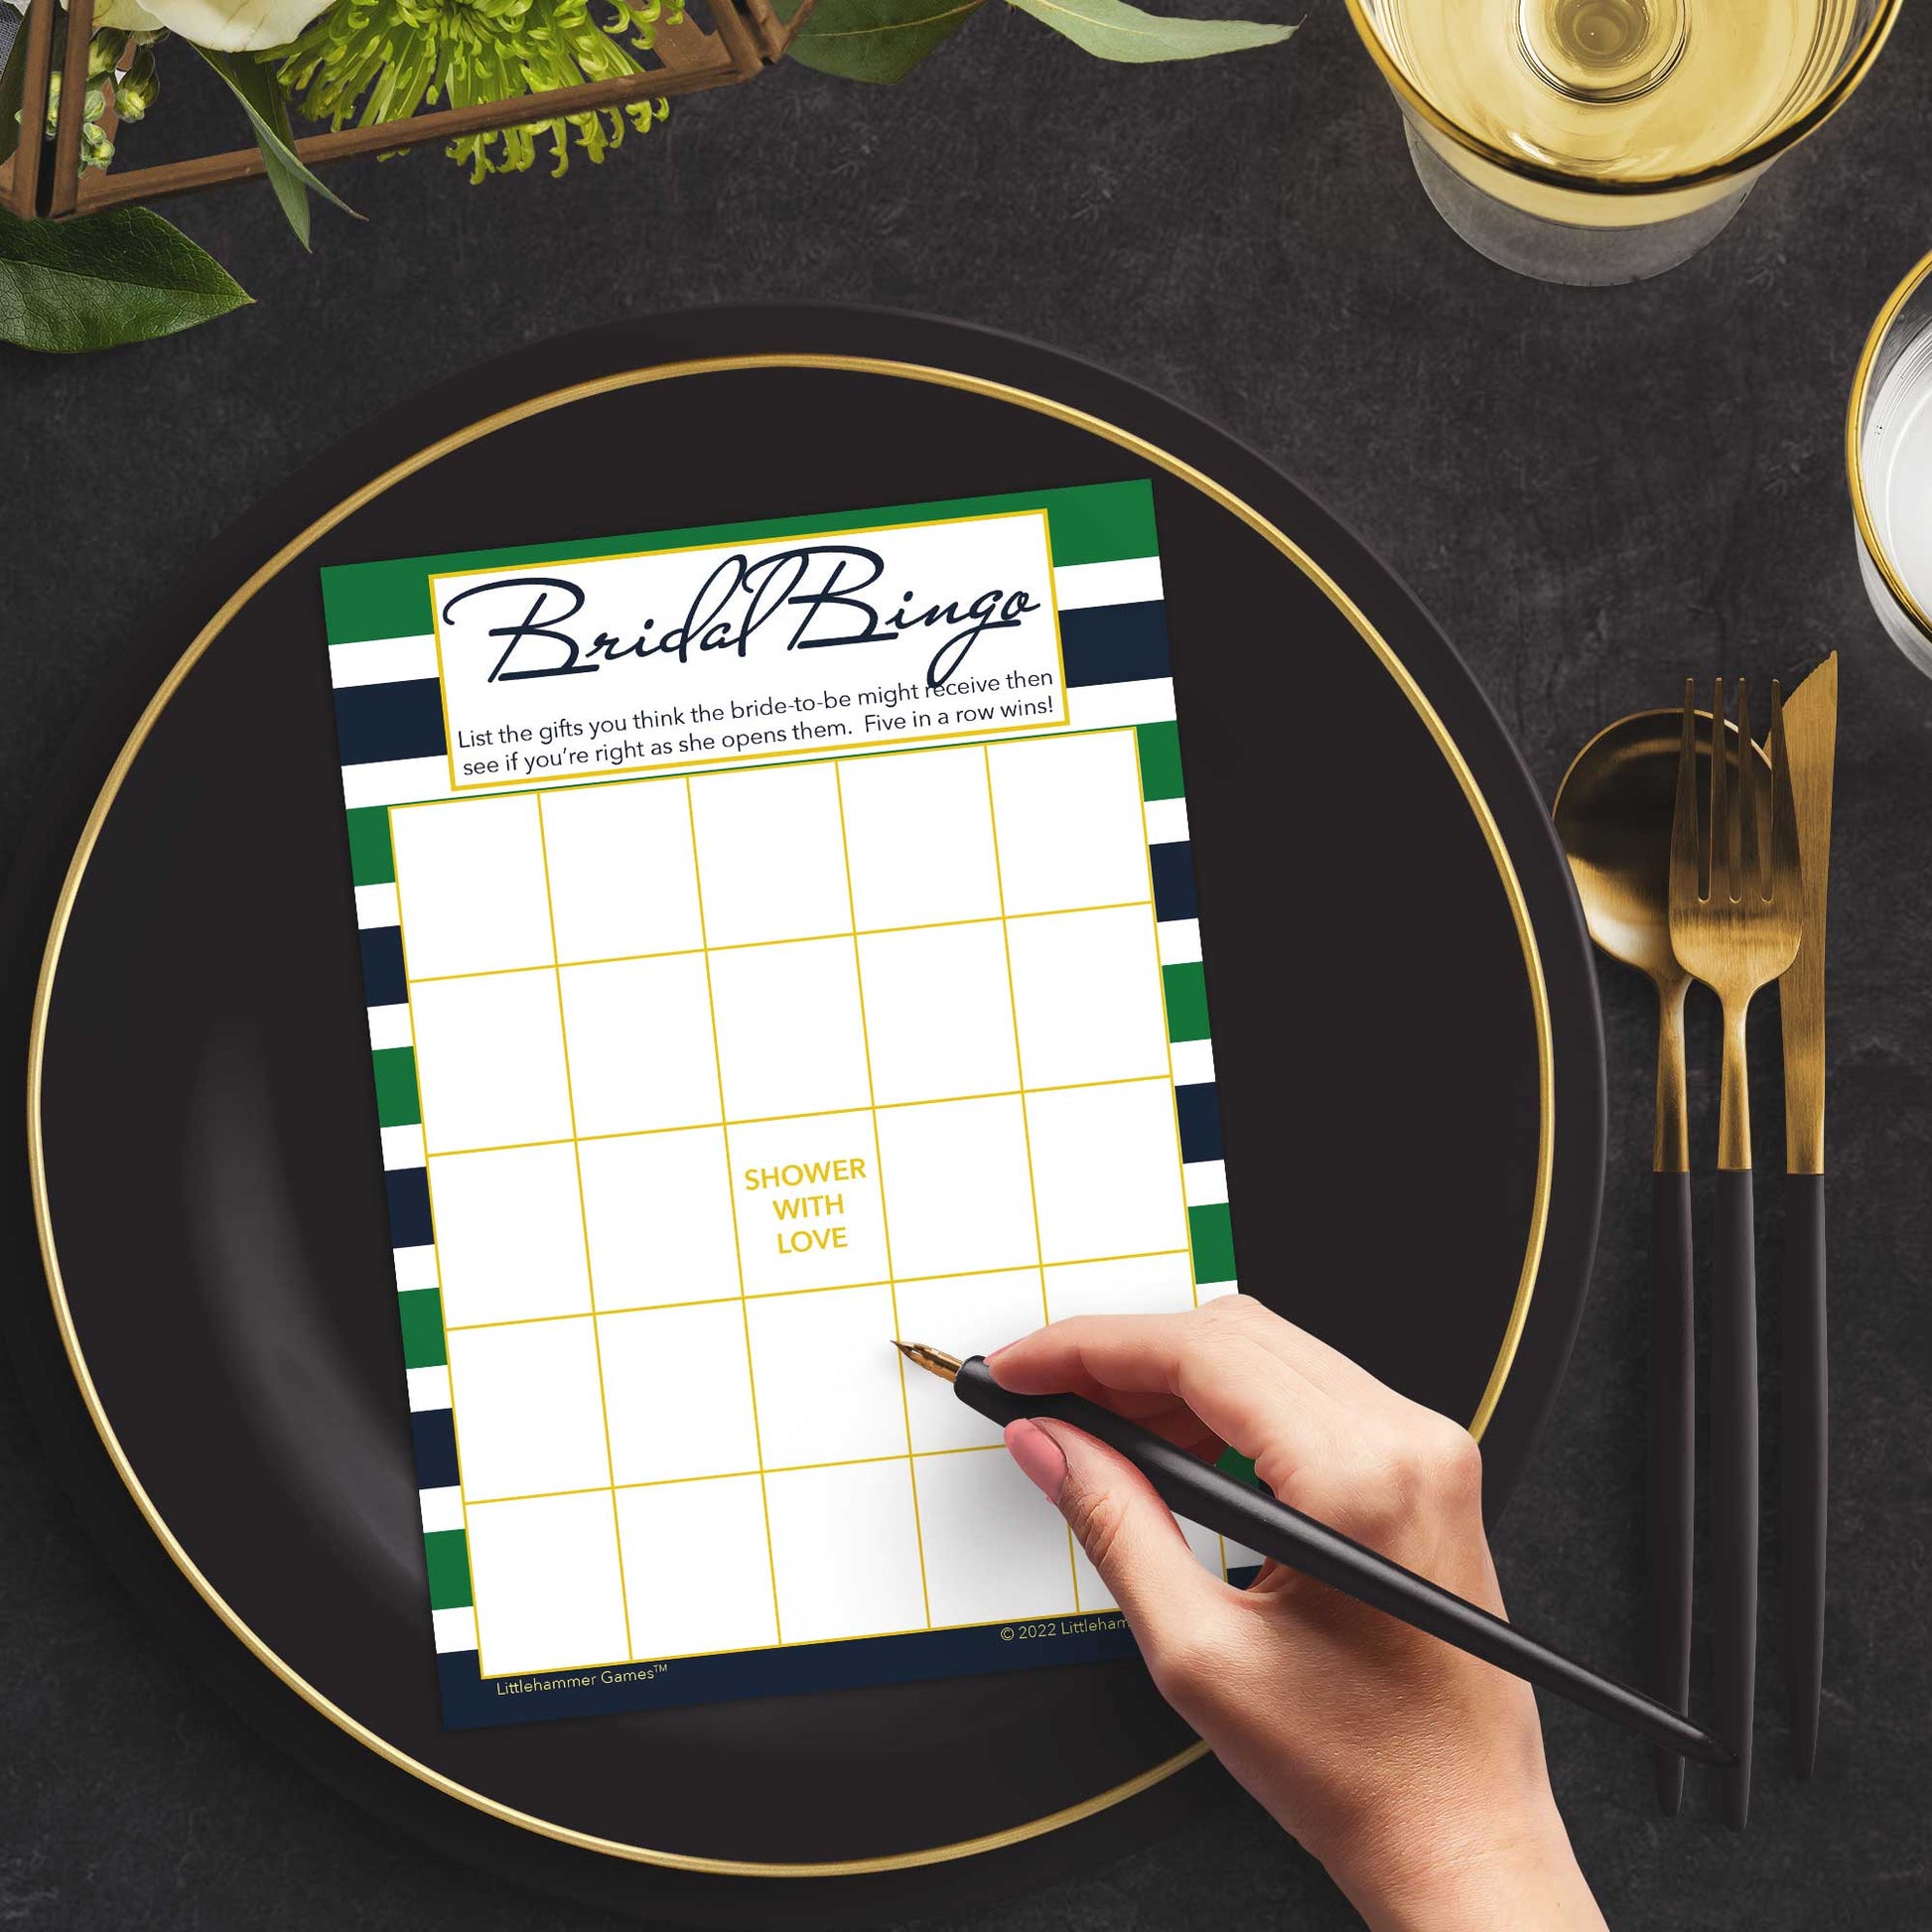 Woman with a pen sitting at a dark place setting with a black and gold plate filling out a green and navy-striped Bridal Gift Bingo card